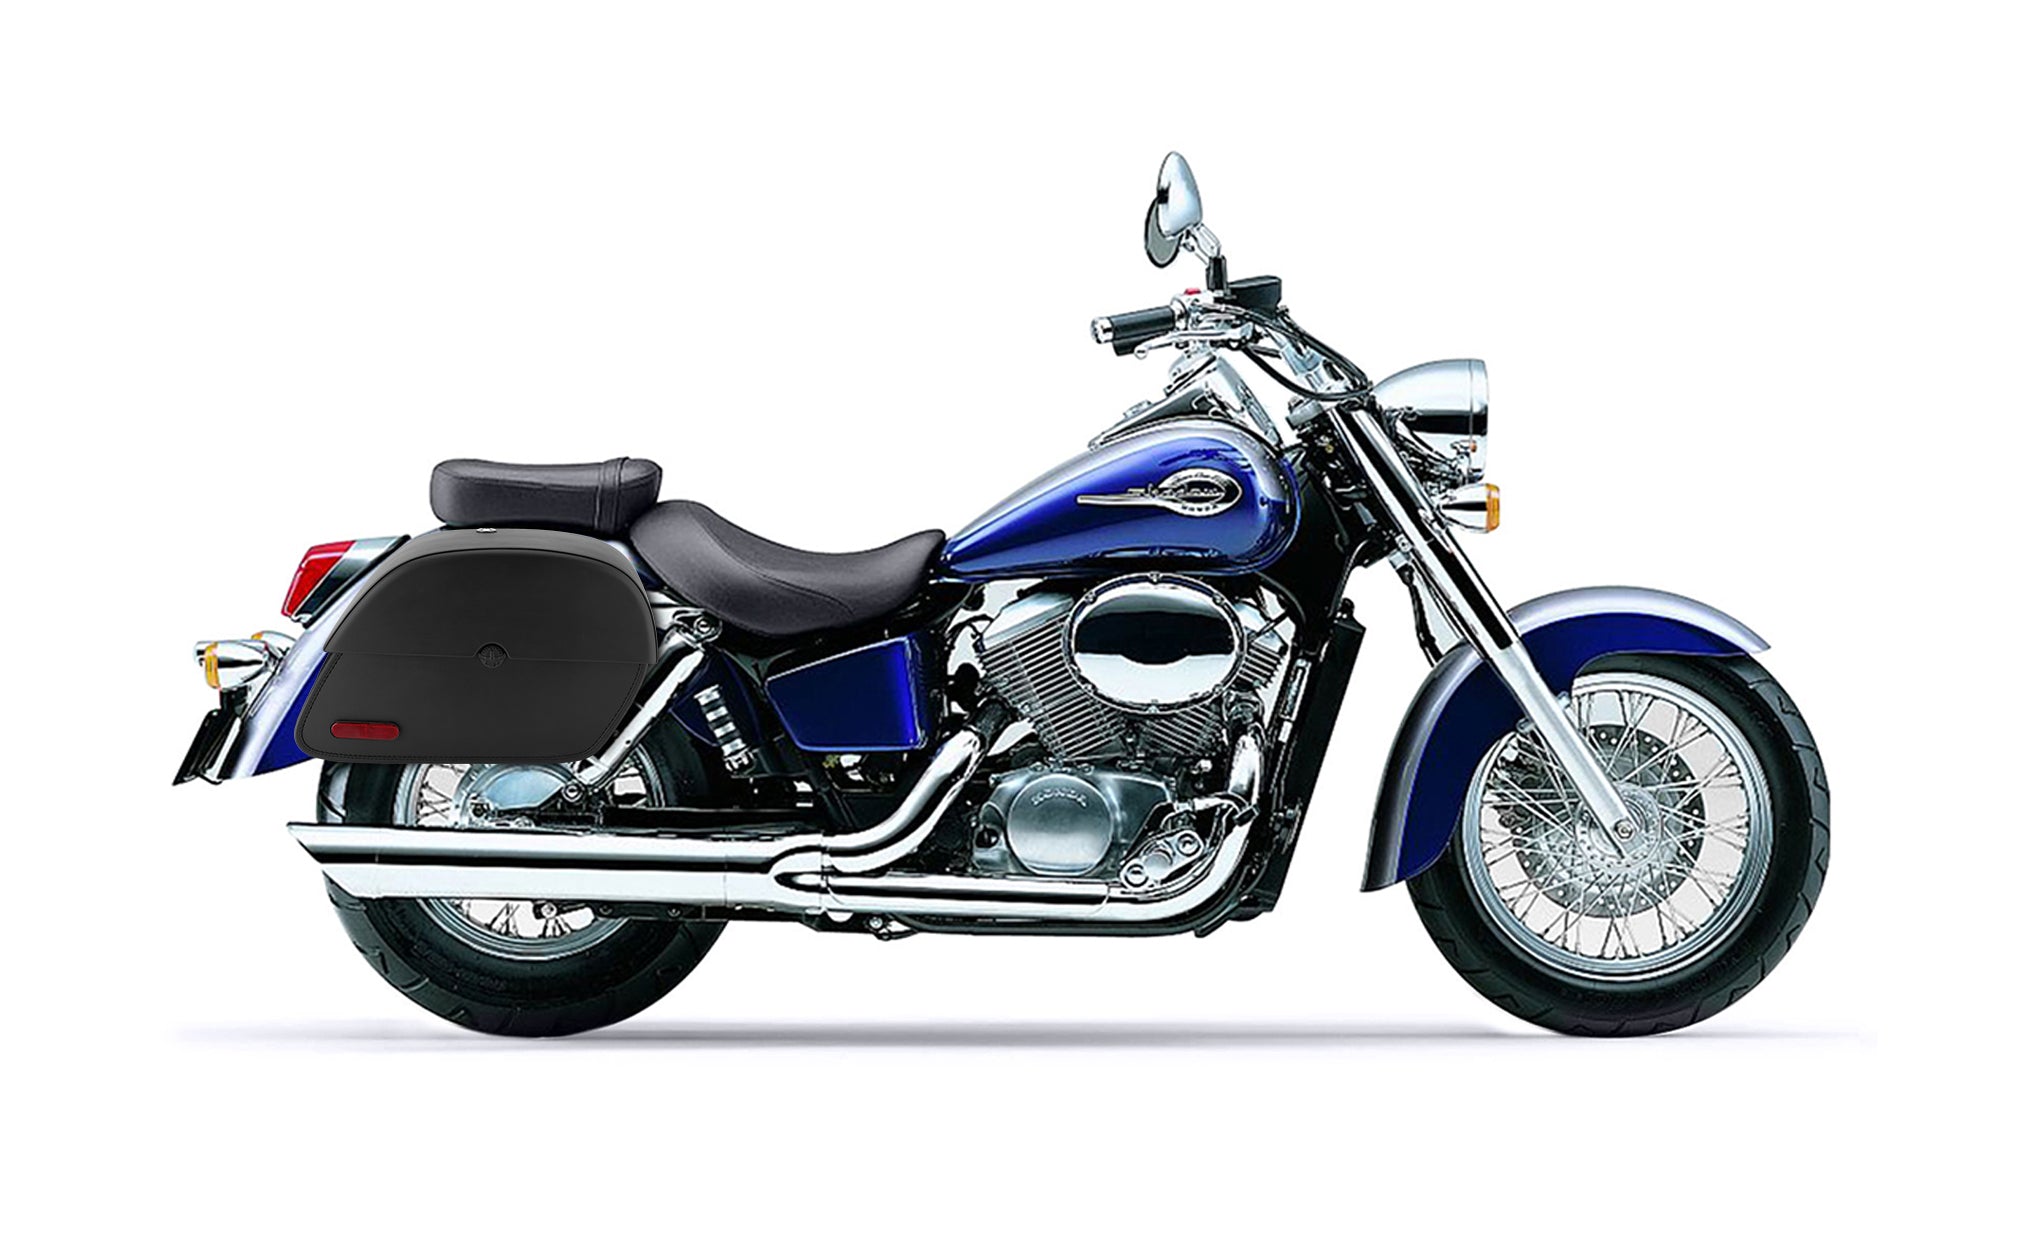 Viking Panzer Medium Honda Shadow 750 Ace Leather Motorcycle Saddlebags Engineering Excellence with Bag on Bike @expand